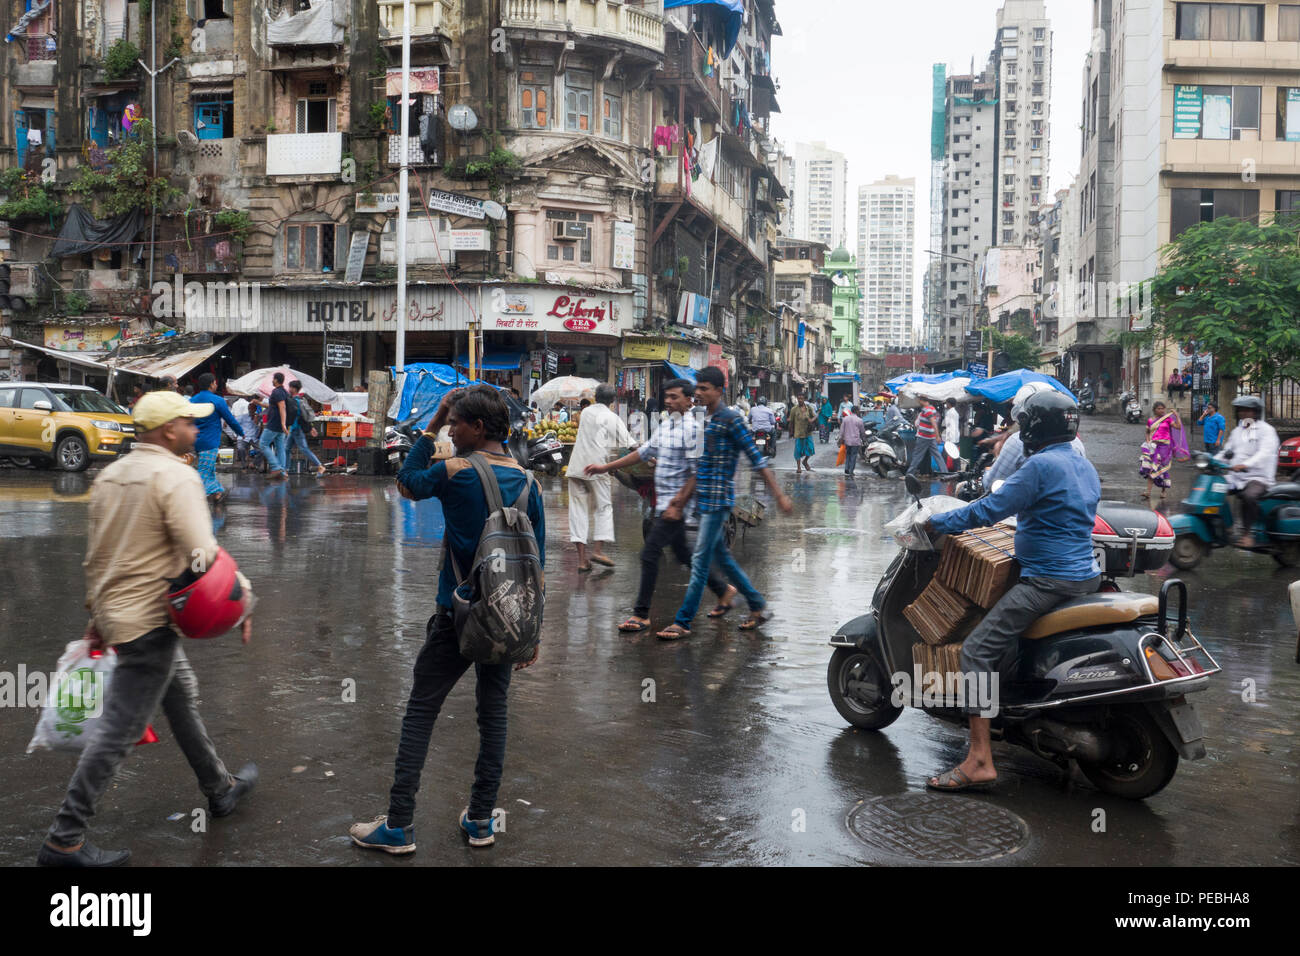 Pedestrians and traffic on street after monsoon downpour in Grant Road, Mumbai, India Stock Photo